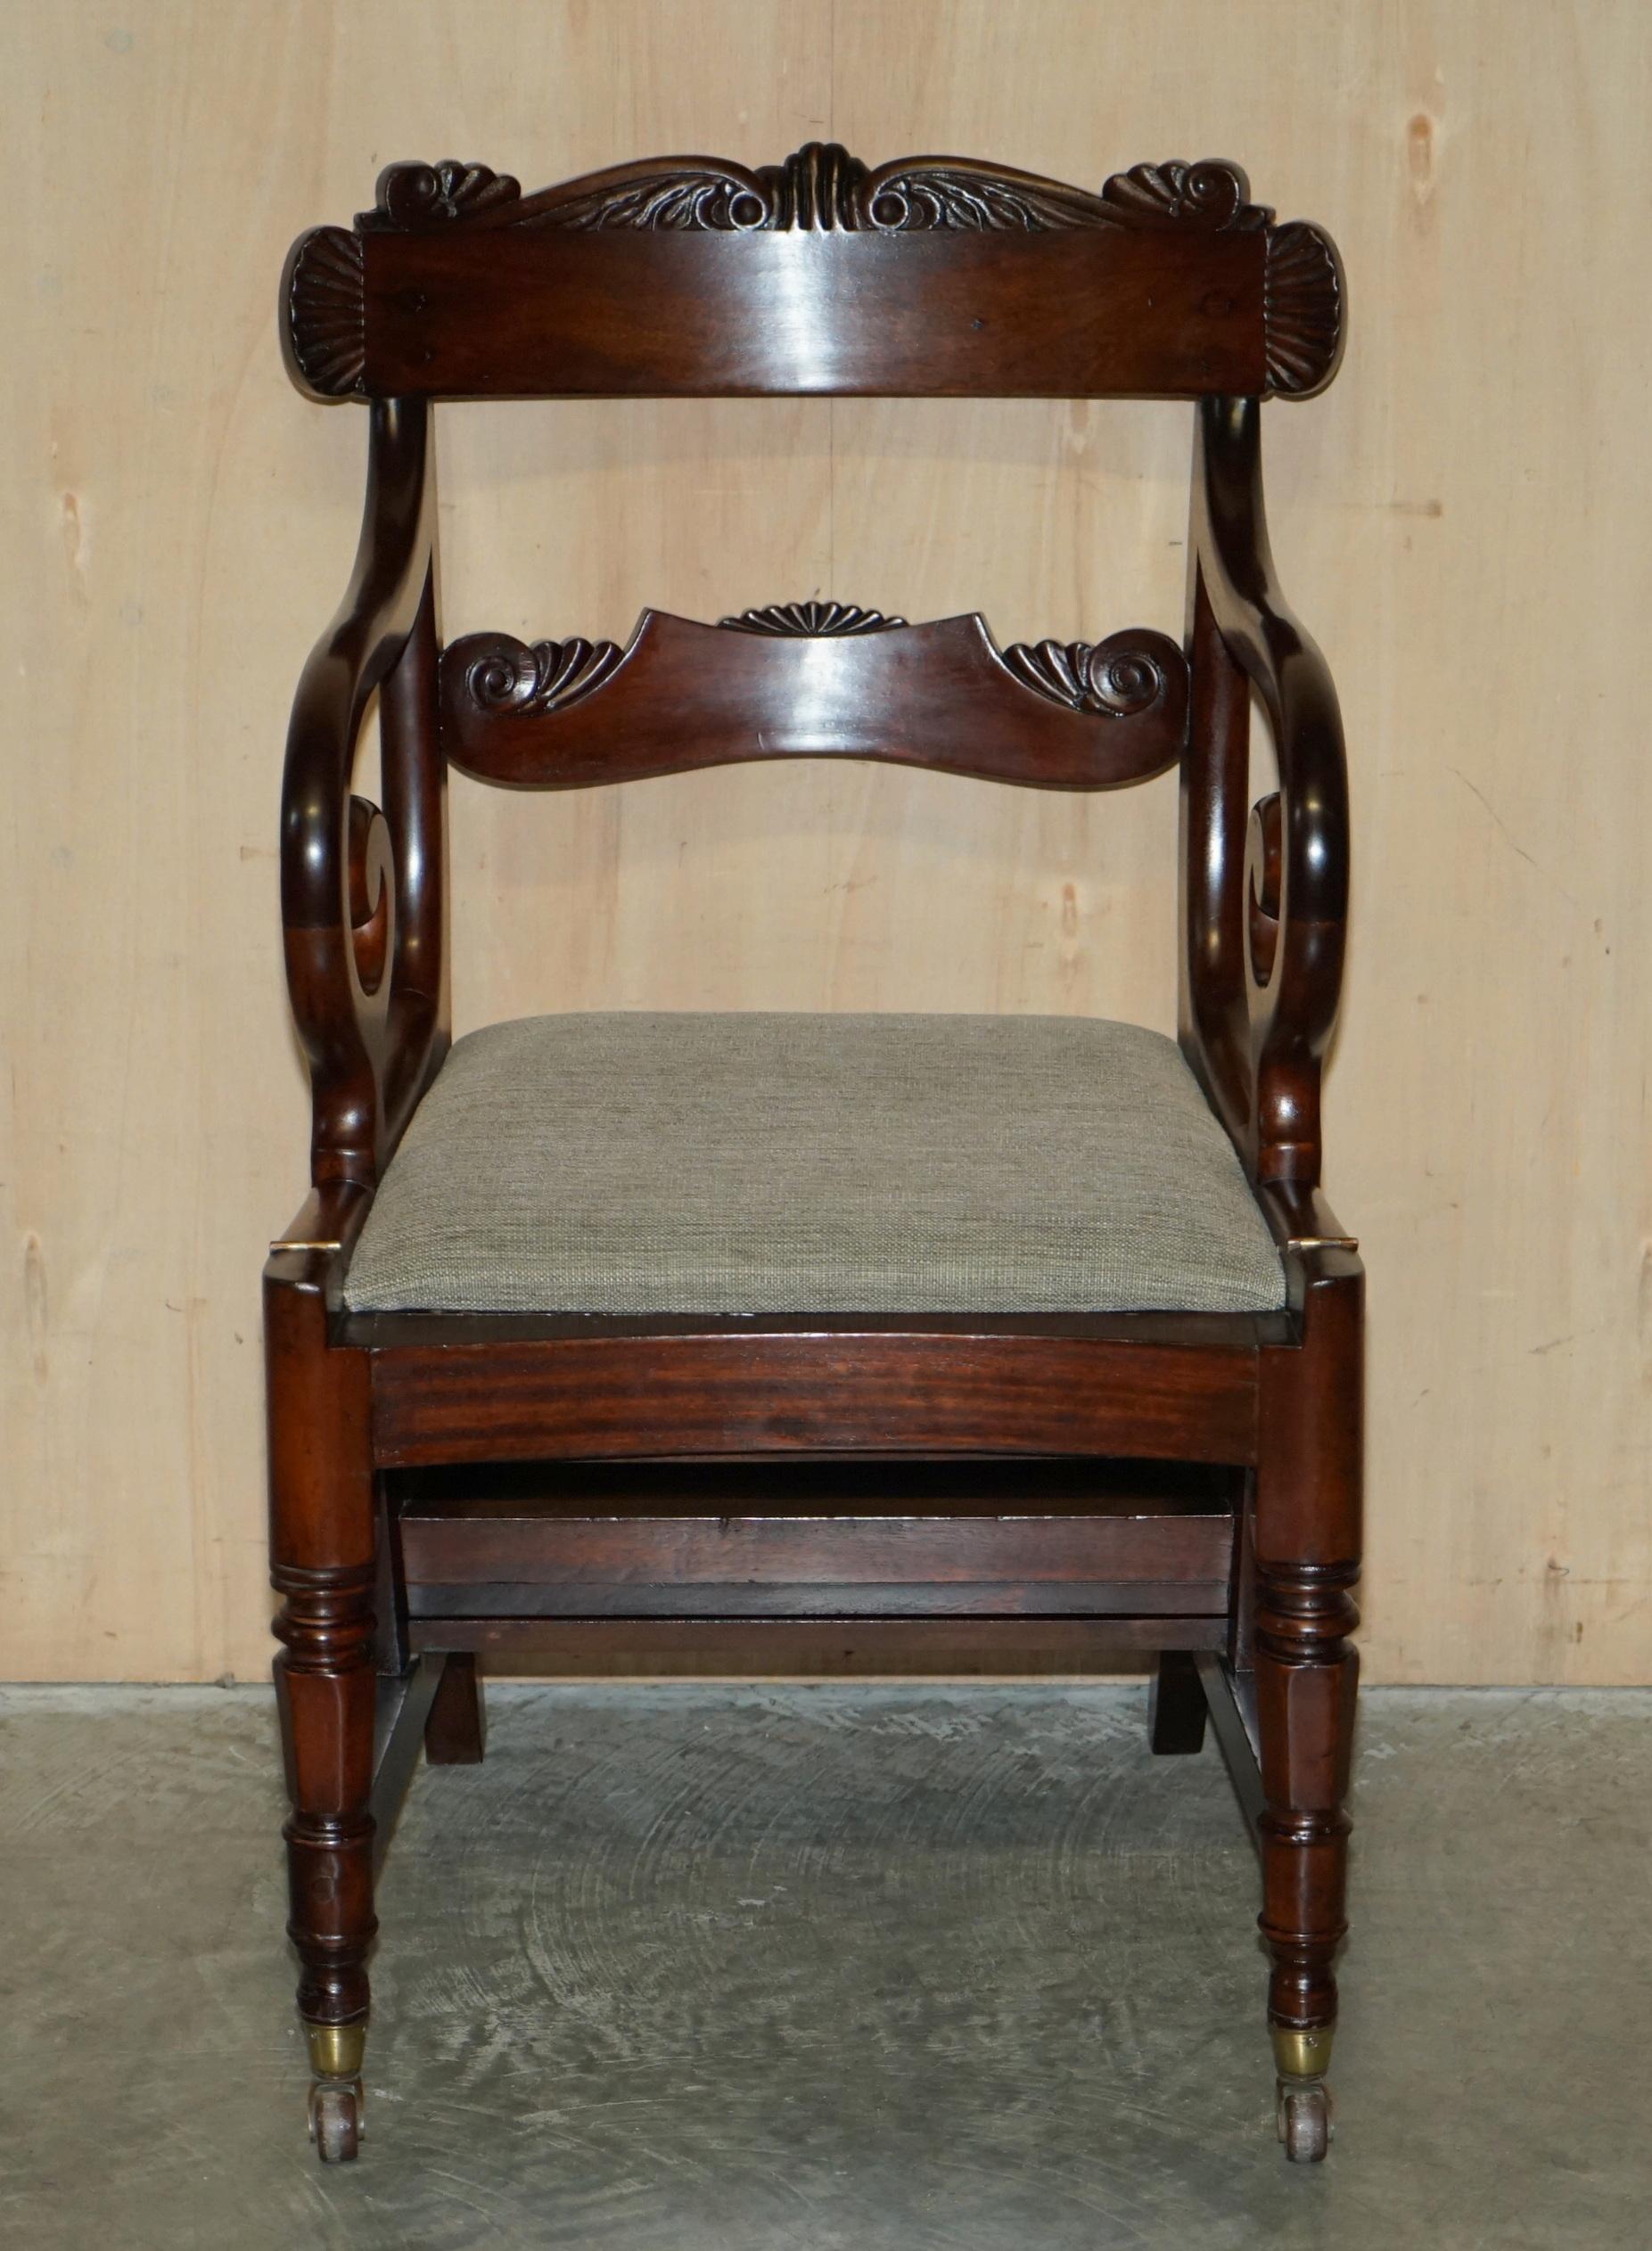 We are delighted to offer for sale this large and collectable lightly restored William IV circa 1830 Flamed Mahogany, metamorphic armchair which converts into Library steps attributed to Gillows of Lancaster and London.

This is a wonderful piece